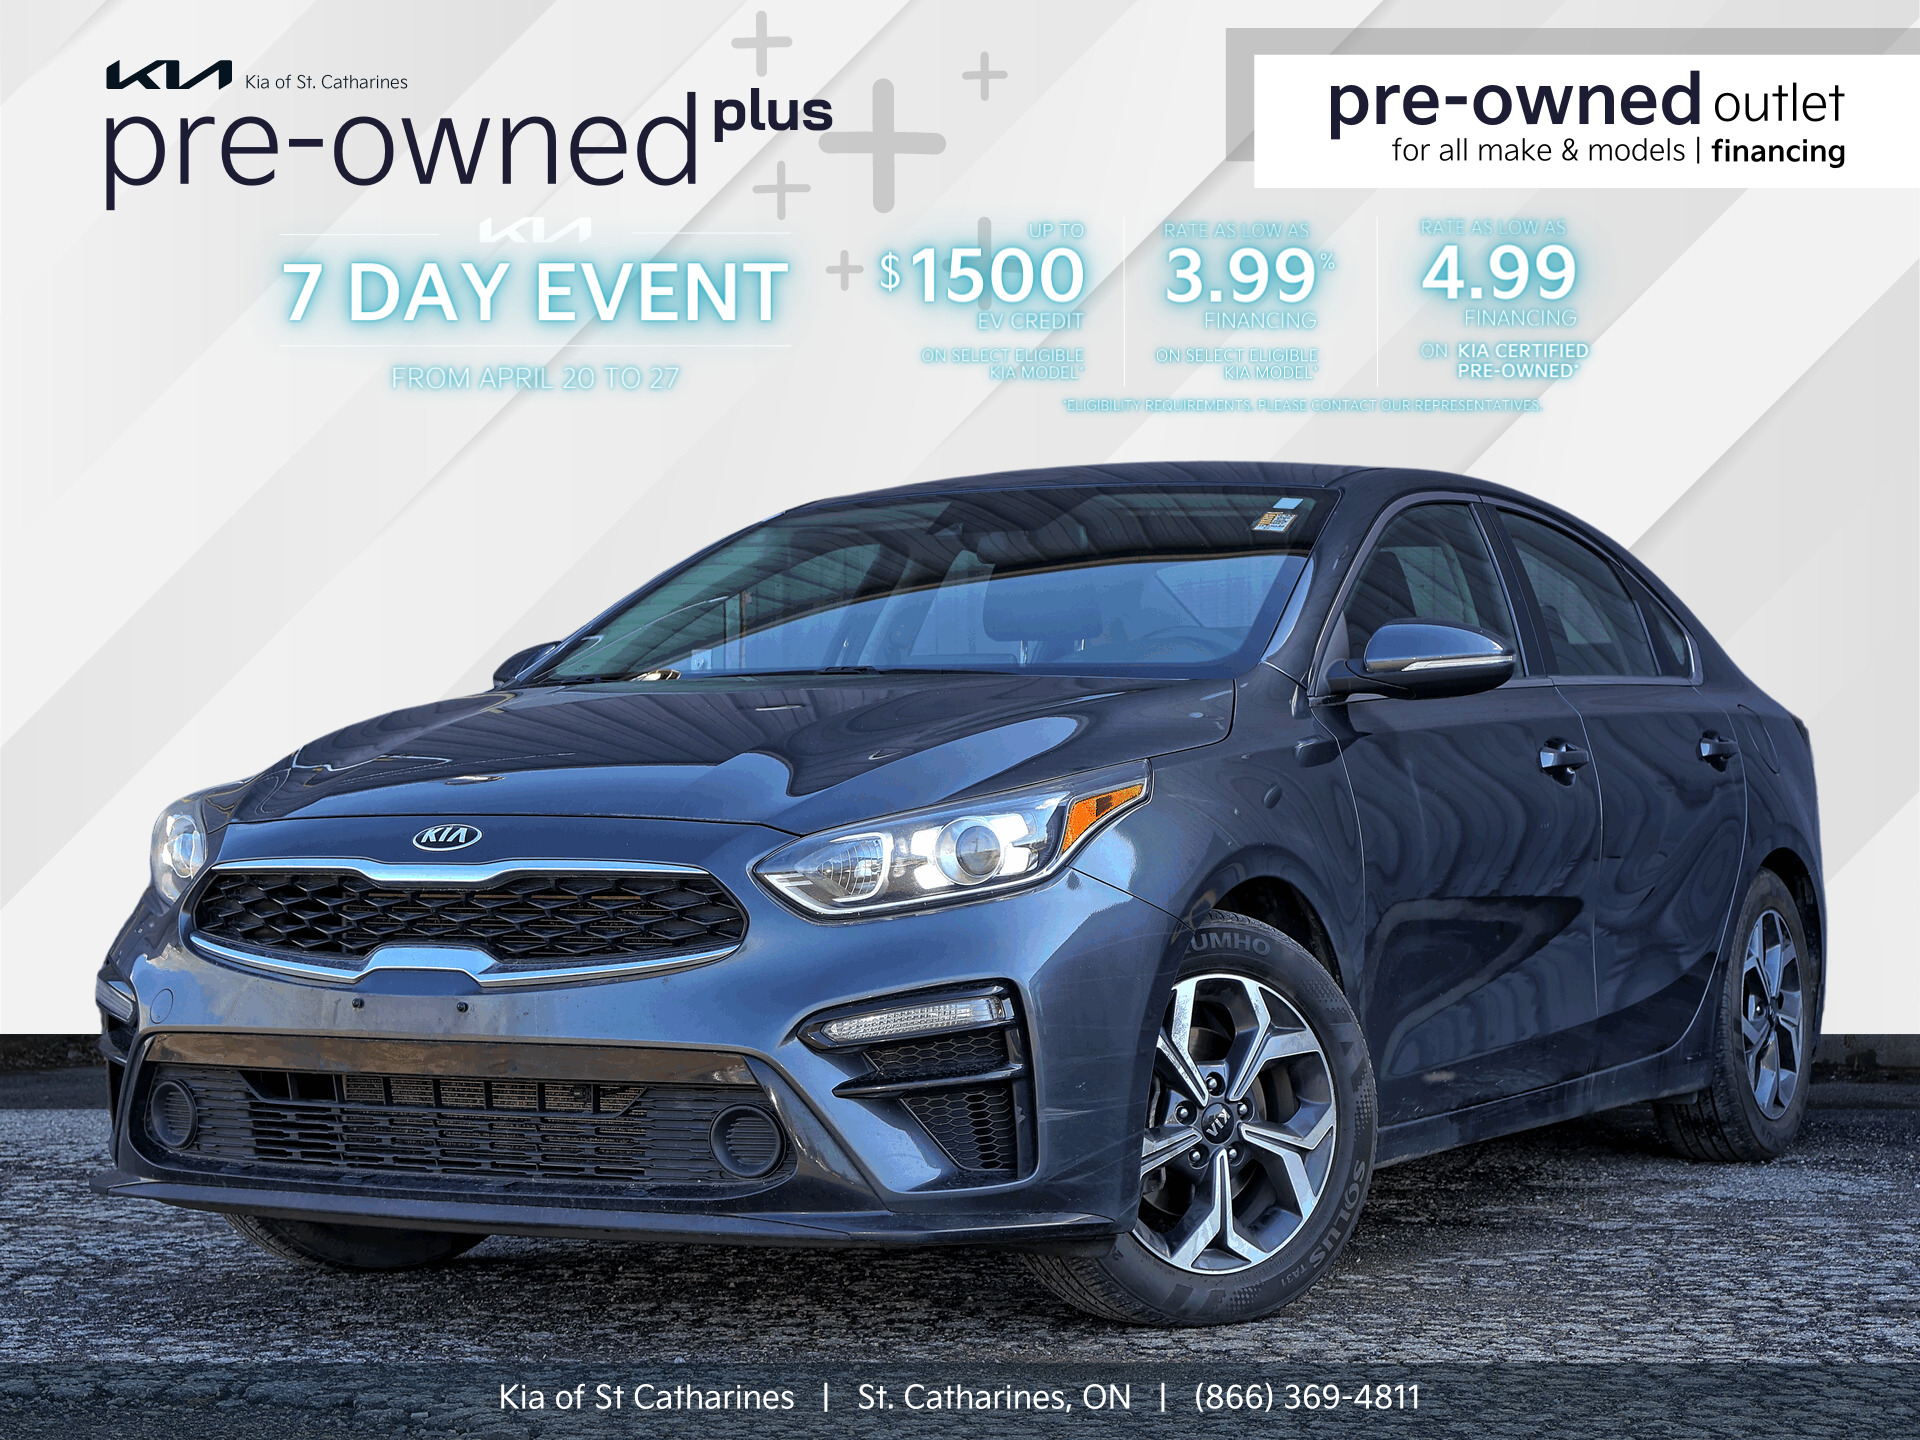 2020 Kia Forte EX | 2 Sets of Tires | Lane Assist | Android Auto